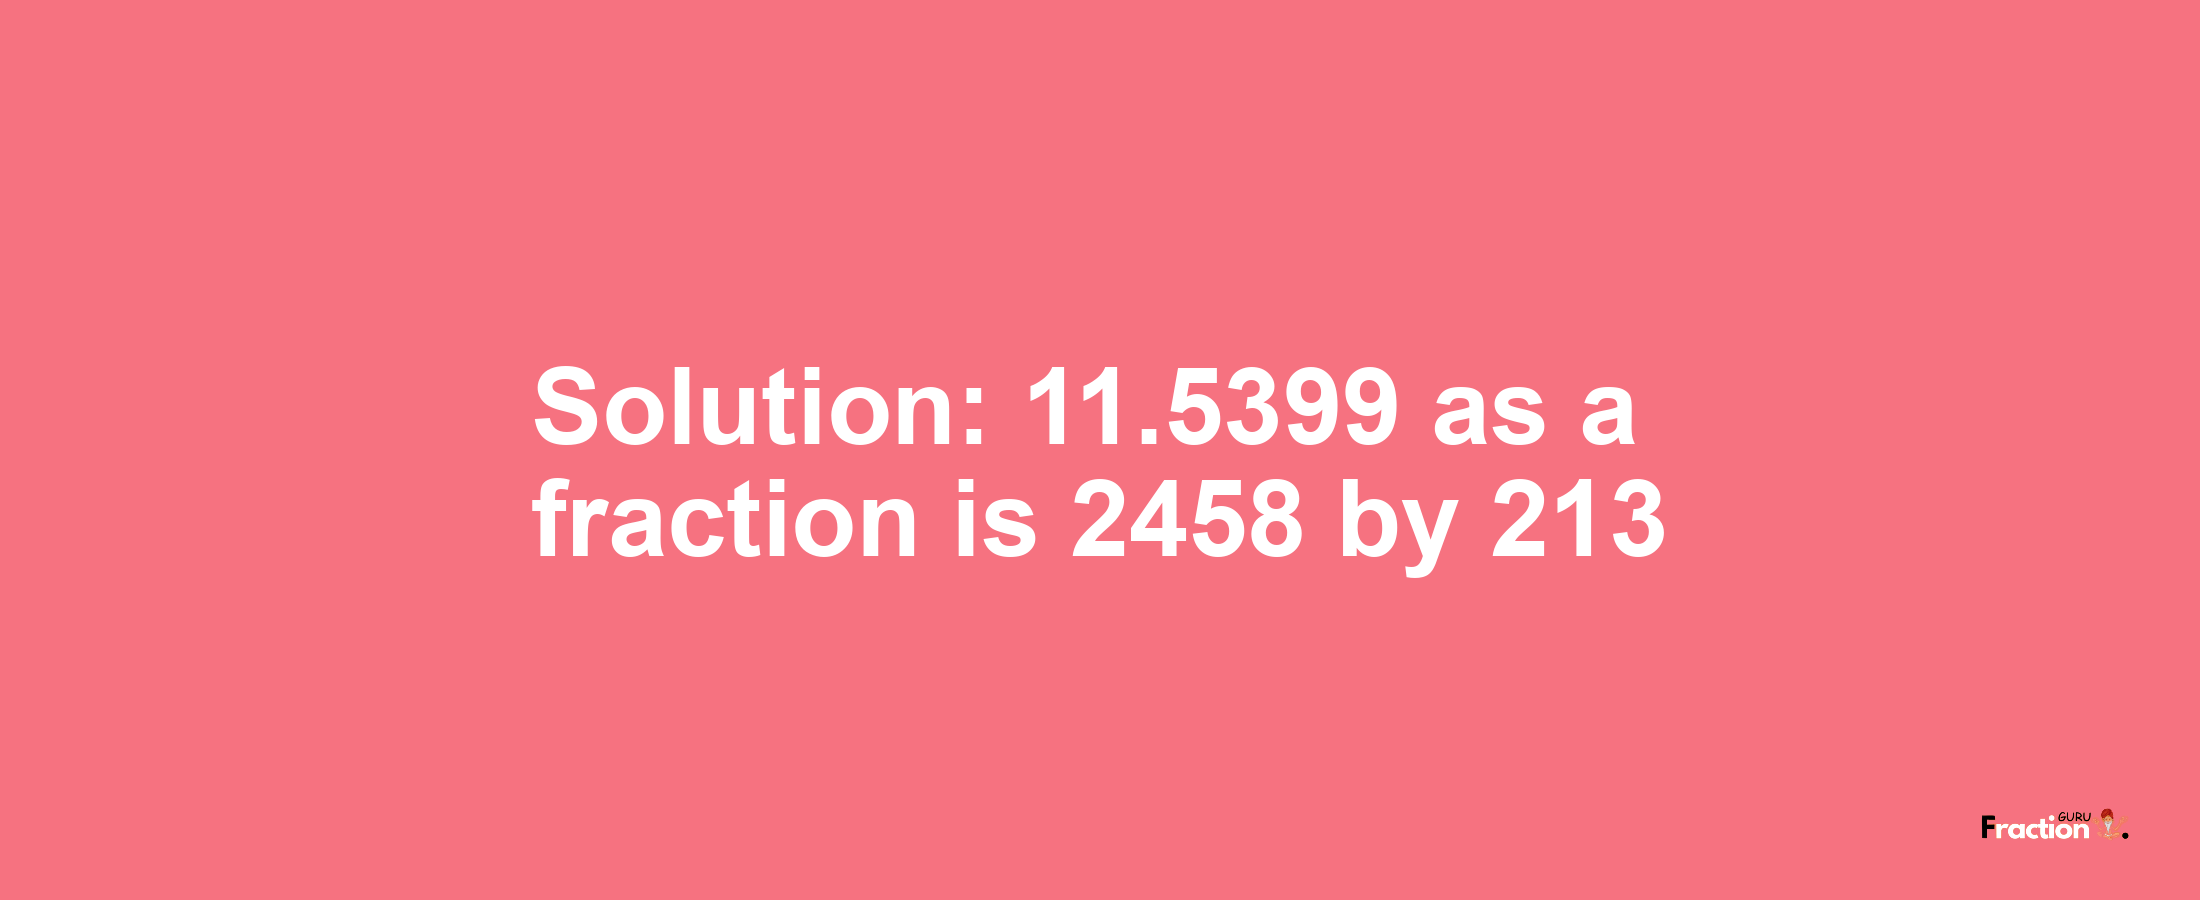 Solution:11.5399 as a fraction is 2458/213